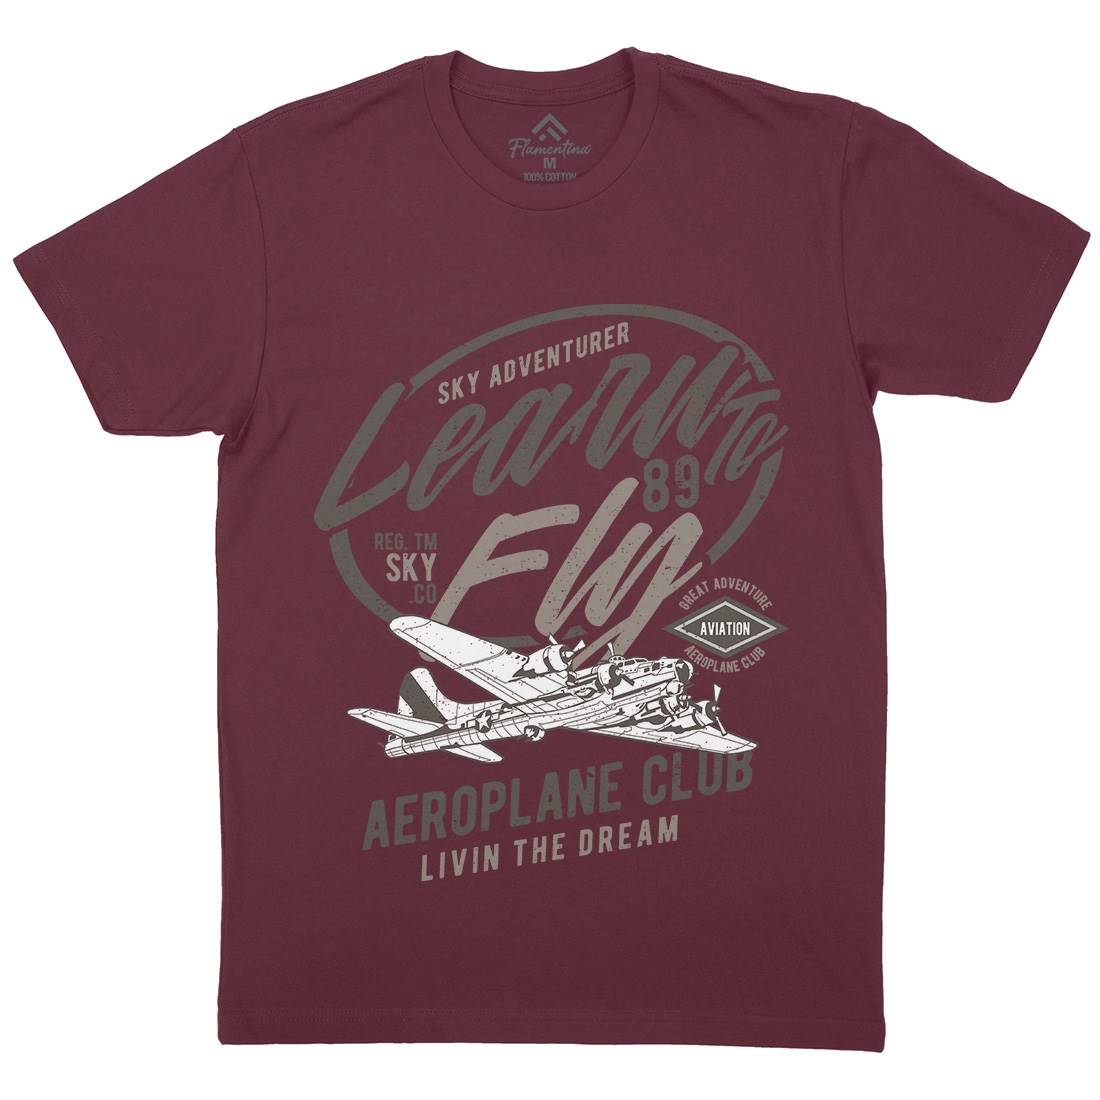 Learn To Fly Mens Organic Crew Neck T-Shirt Vehicles A704